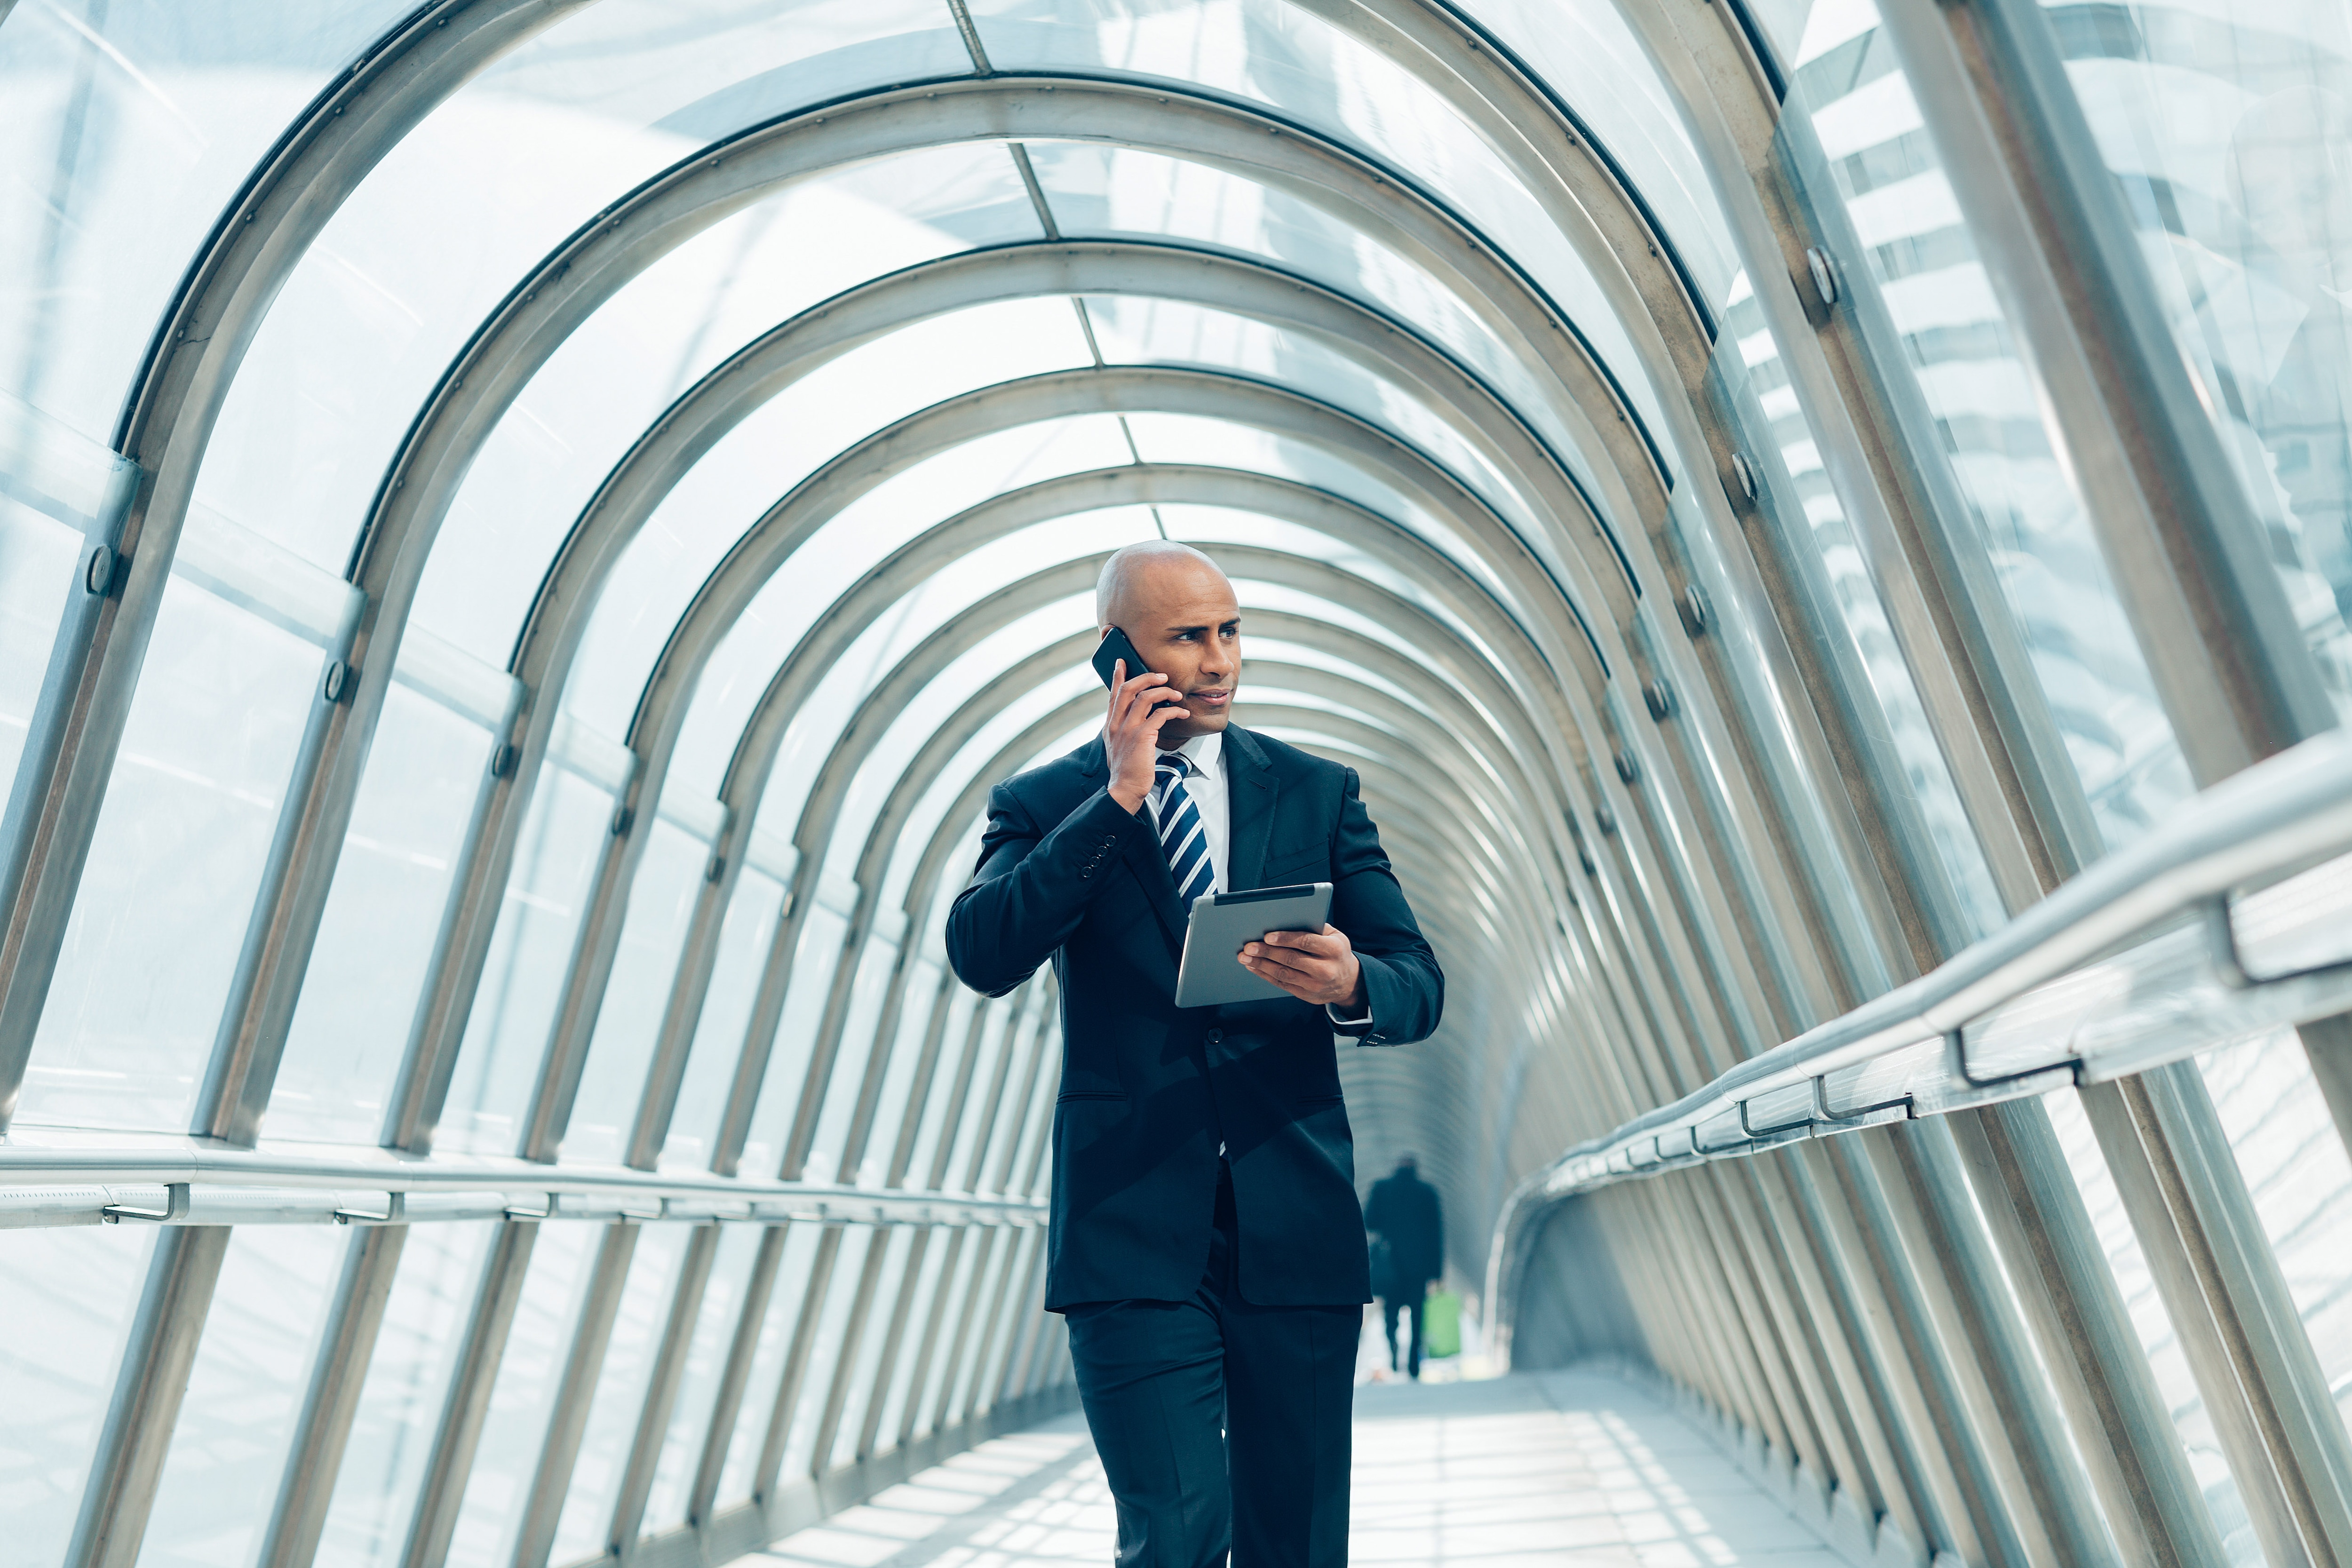 A man walking down the tunnel in a suit on the phone